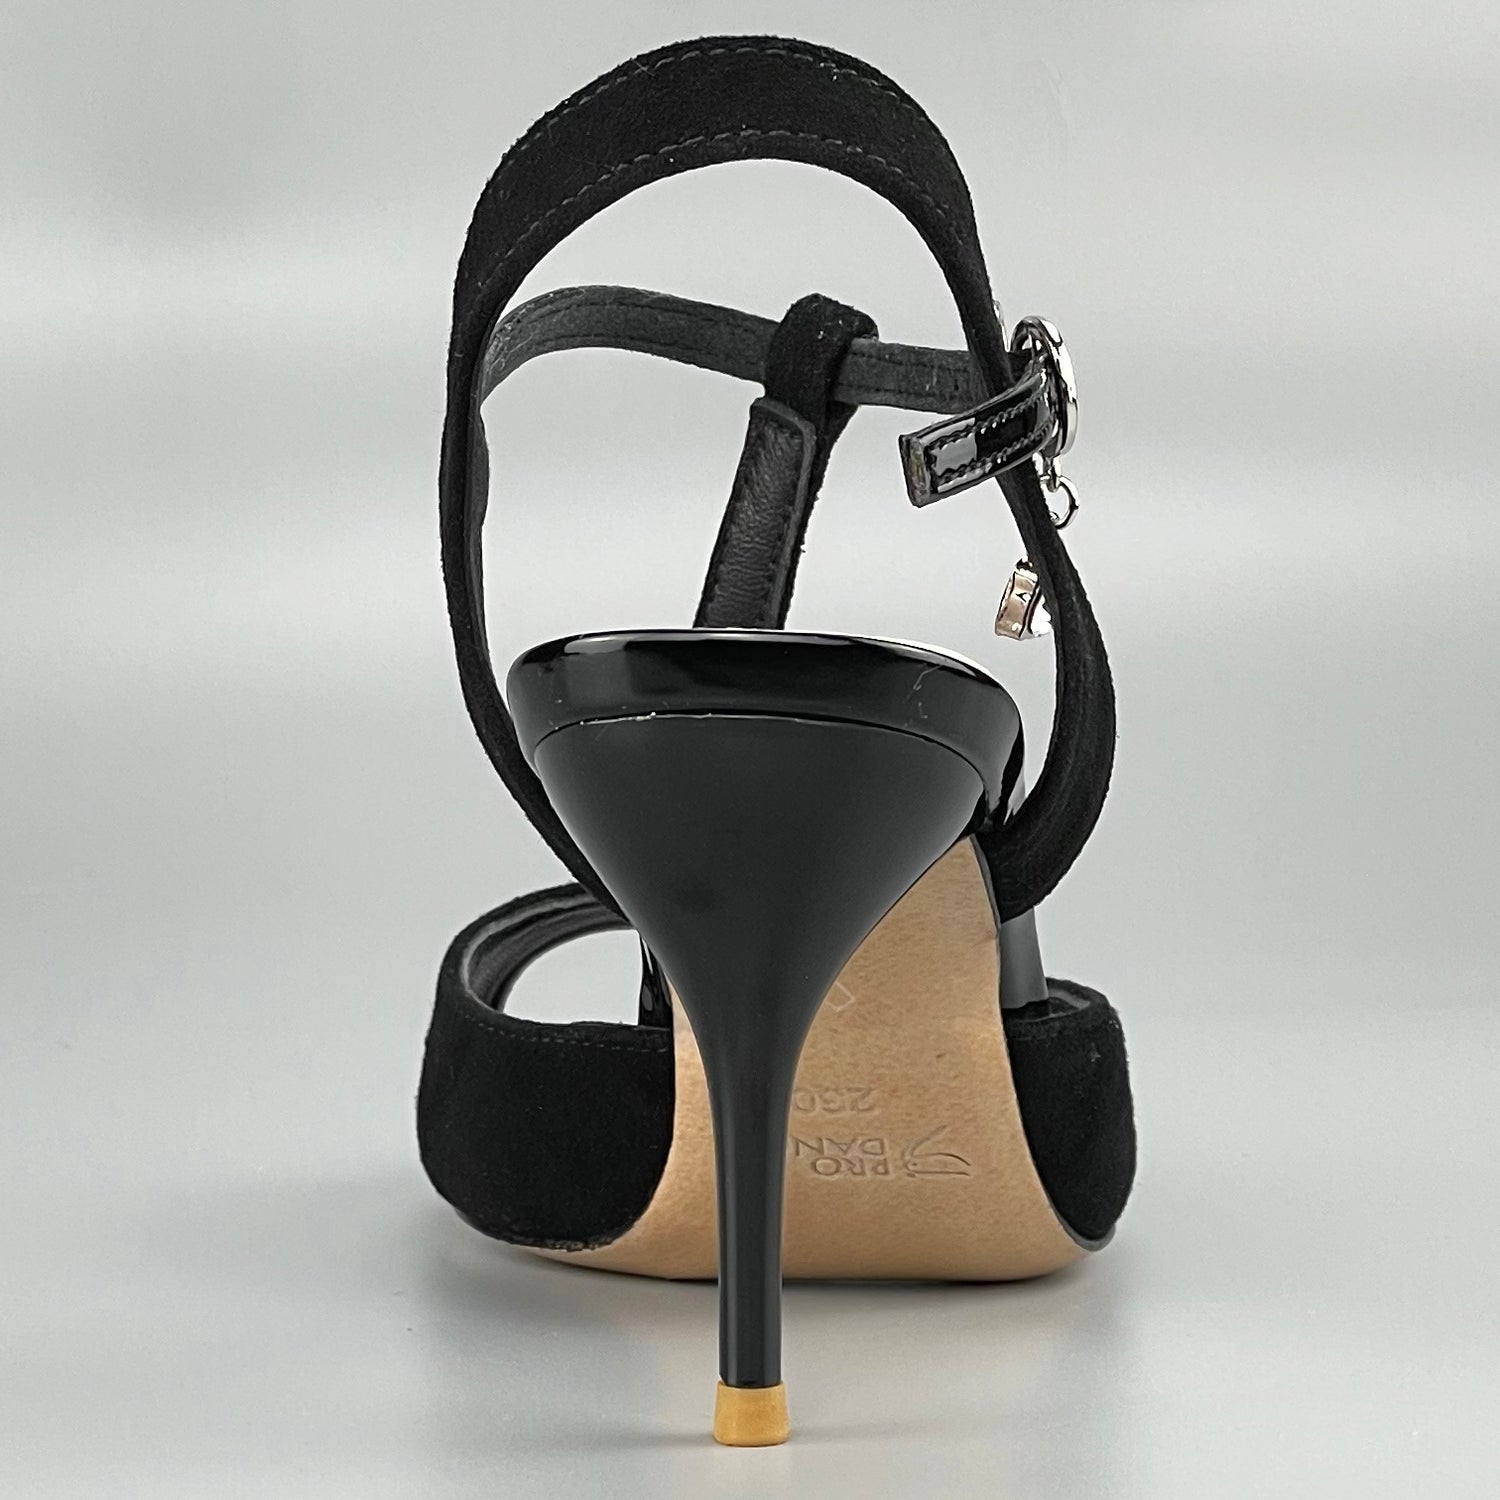 Pro Dancer open-toe and open-back Argentine Tango shoes with high salsa heels and hard leather sole sandals in black (PD-9046A)8